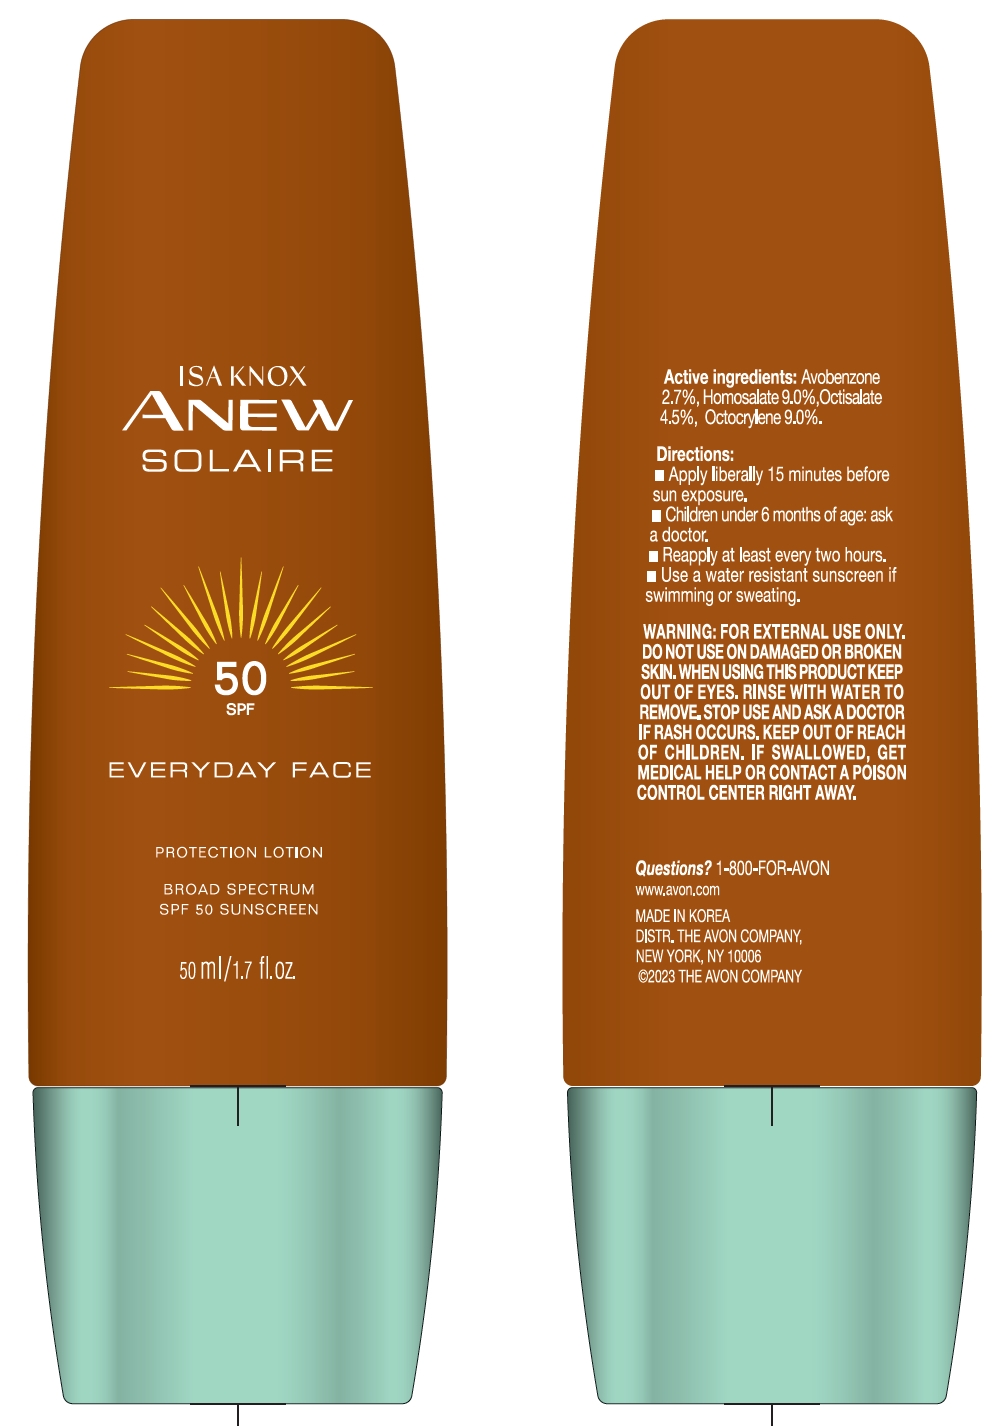 Isaknox Anew Solaire Everyday Face SPF50 IC